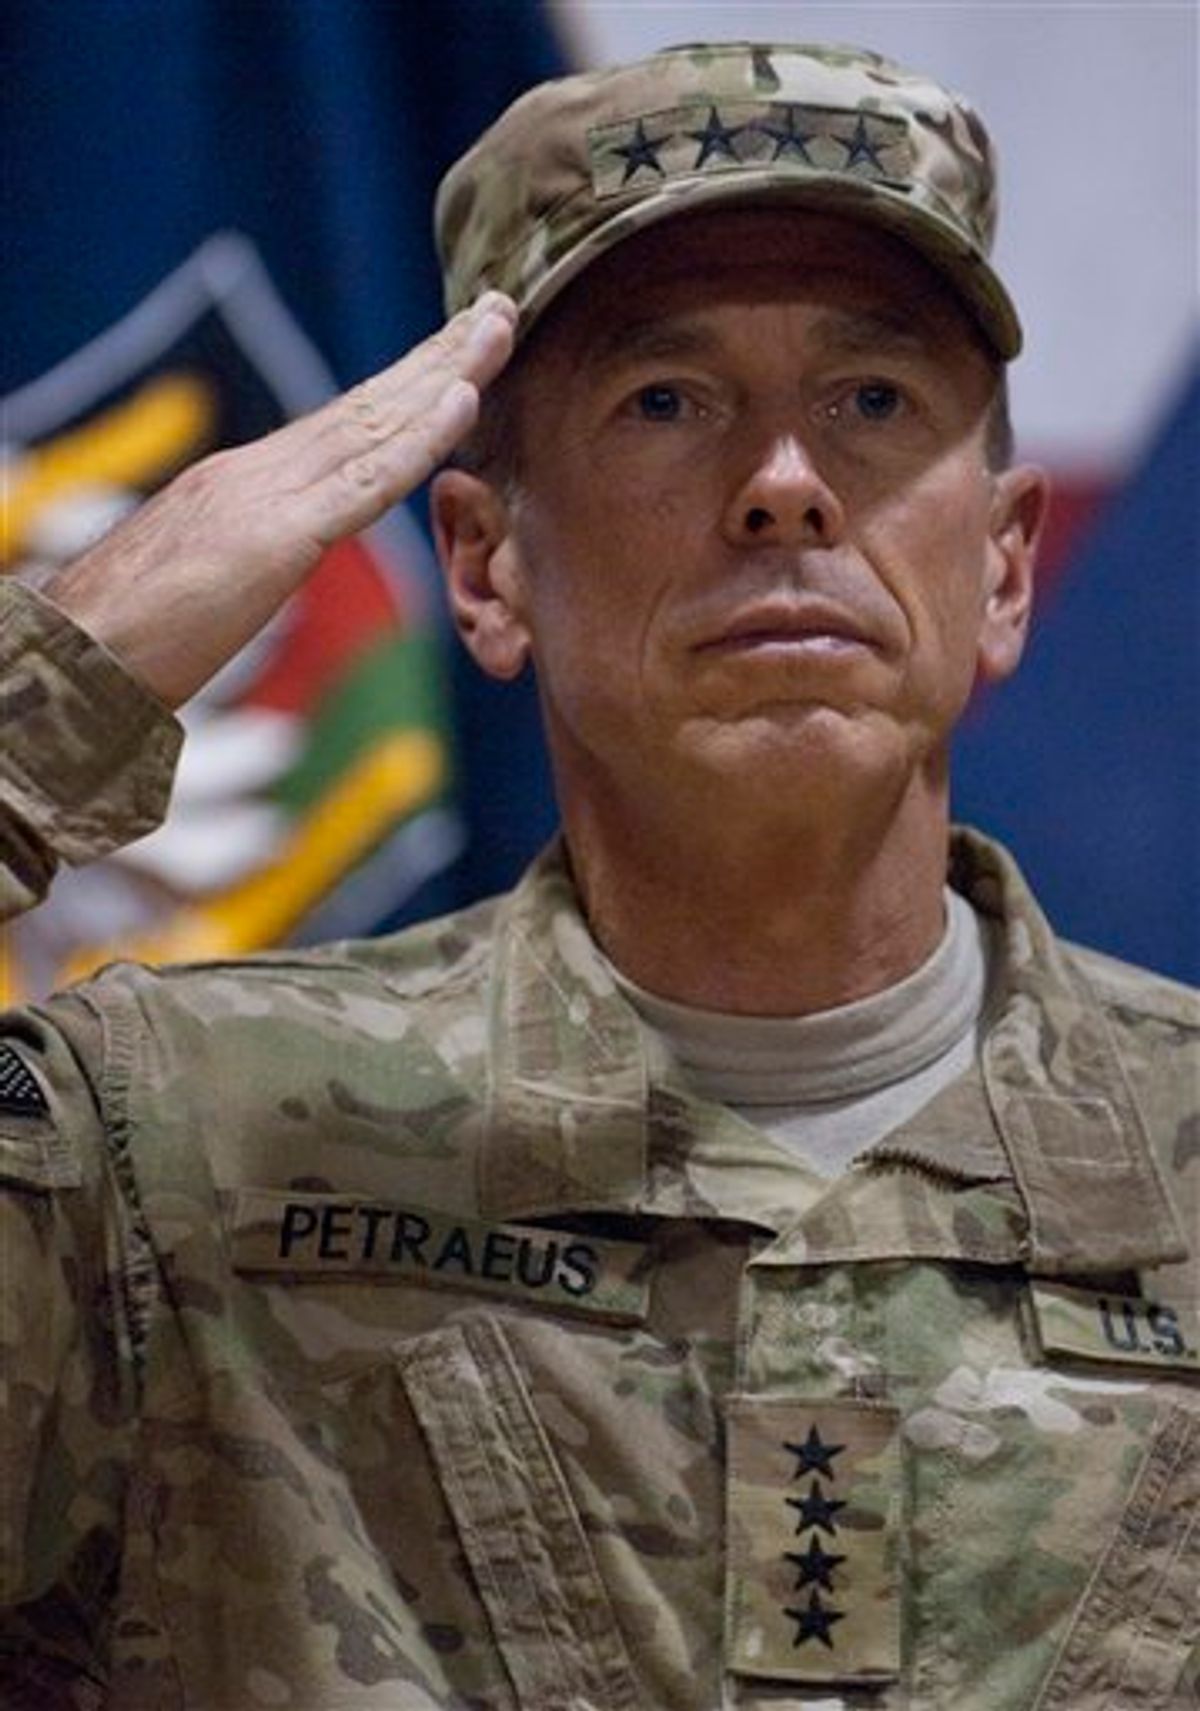 -- ADDS DAY AND DATE PHOTO WAS MADE -- In this photo provided by ISAF Regional Command (South), U.S. Army Gen. David H. Petraeus, commanding general of the NATO International Security Assistance Force (ISAF) and U.S. Forces Afghanistan (USFOR-A), salutes before administering the oath of re-affirmation and re-enlistment to 235 U.S. service members during a ceremony called "Operation Enduring Commitment - The Red, White and True," held at Kandahar Airfield in Kandahar, Afghanistan, Monday July 4, 2011. (AP Photo/ U.S. Navy Lt. j.g. Haraz N. Ghanbari)   (AP)